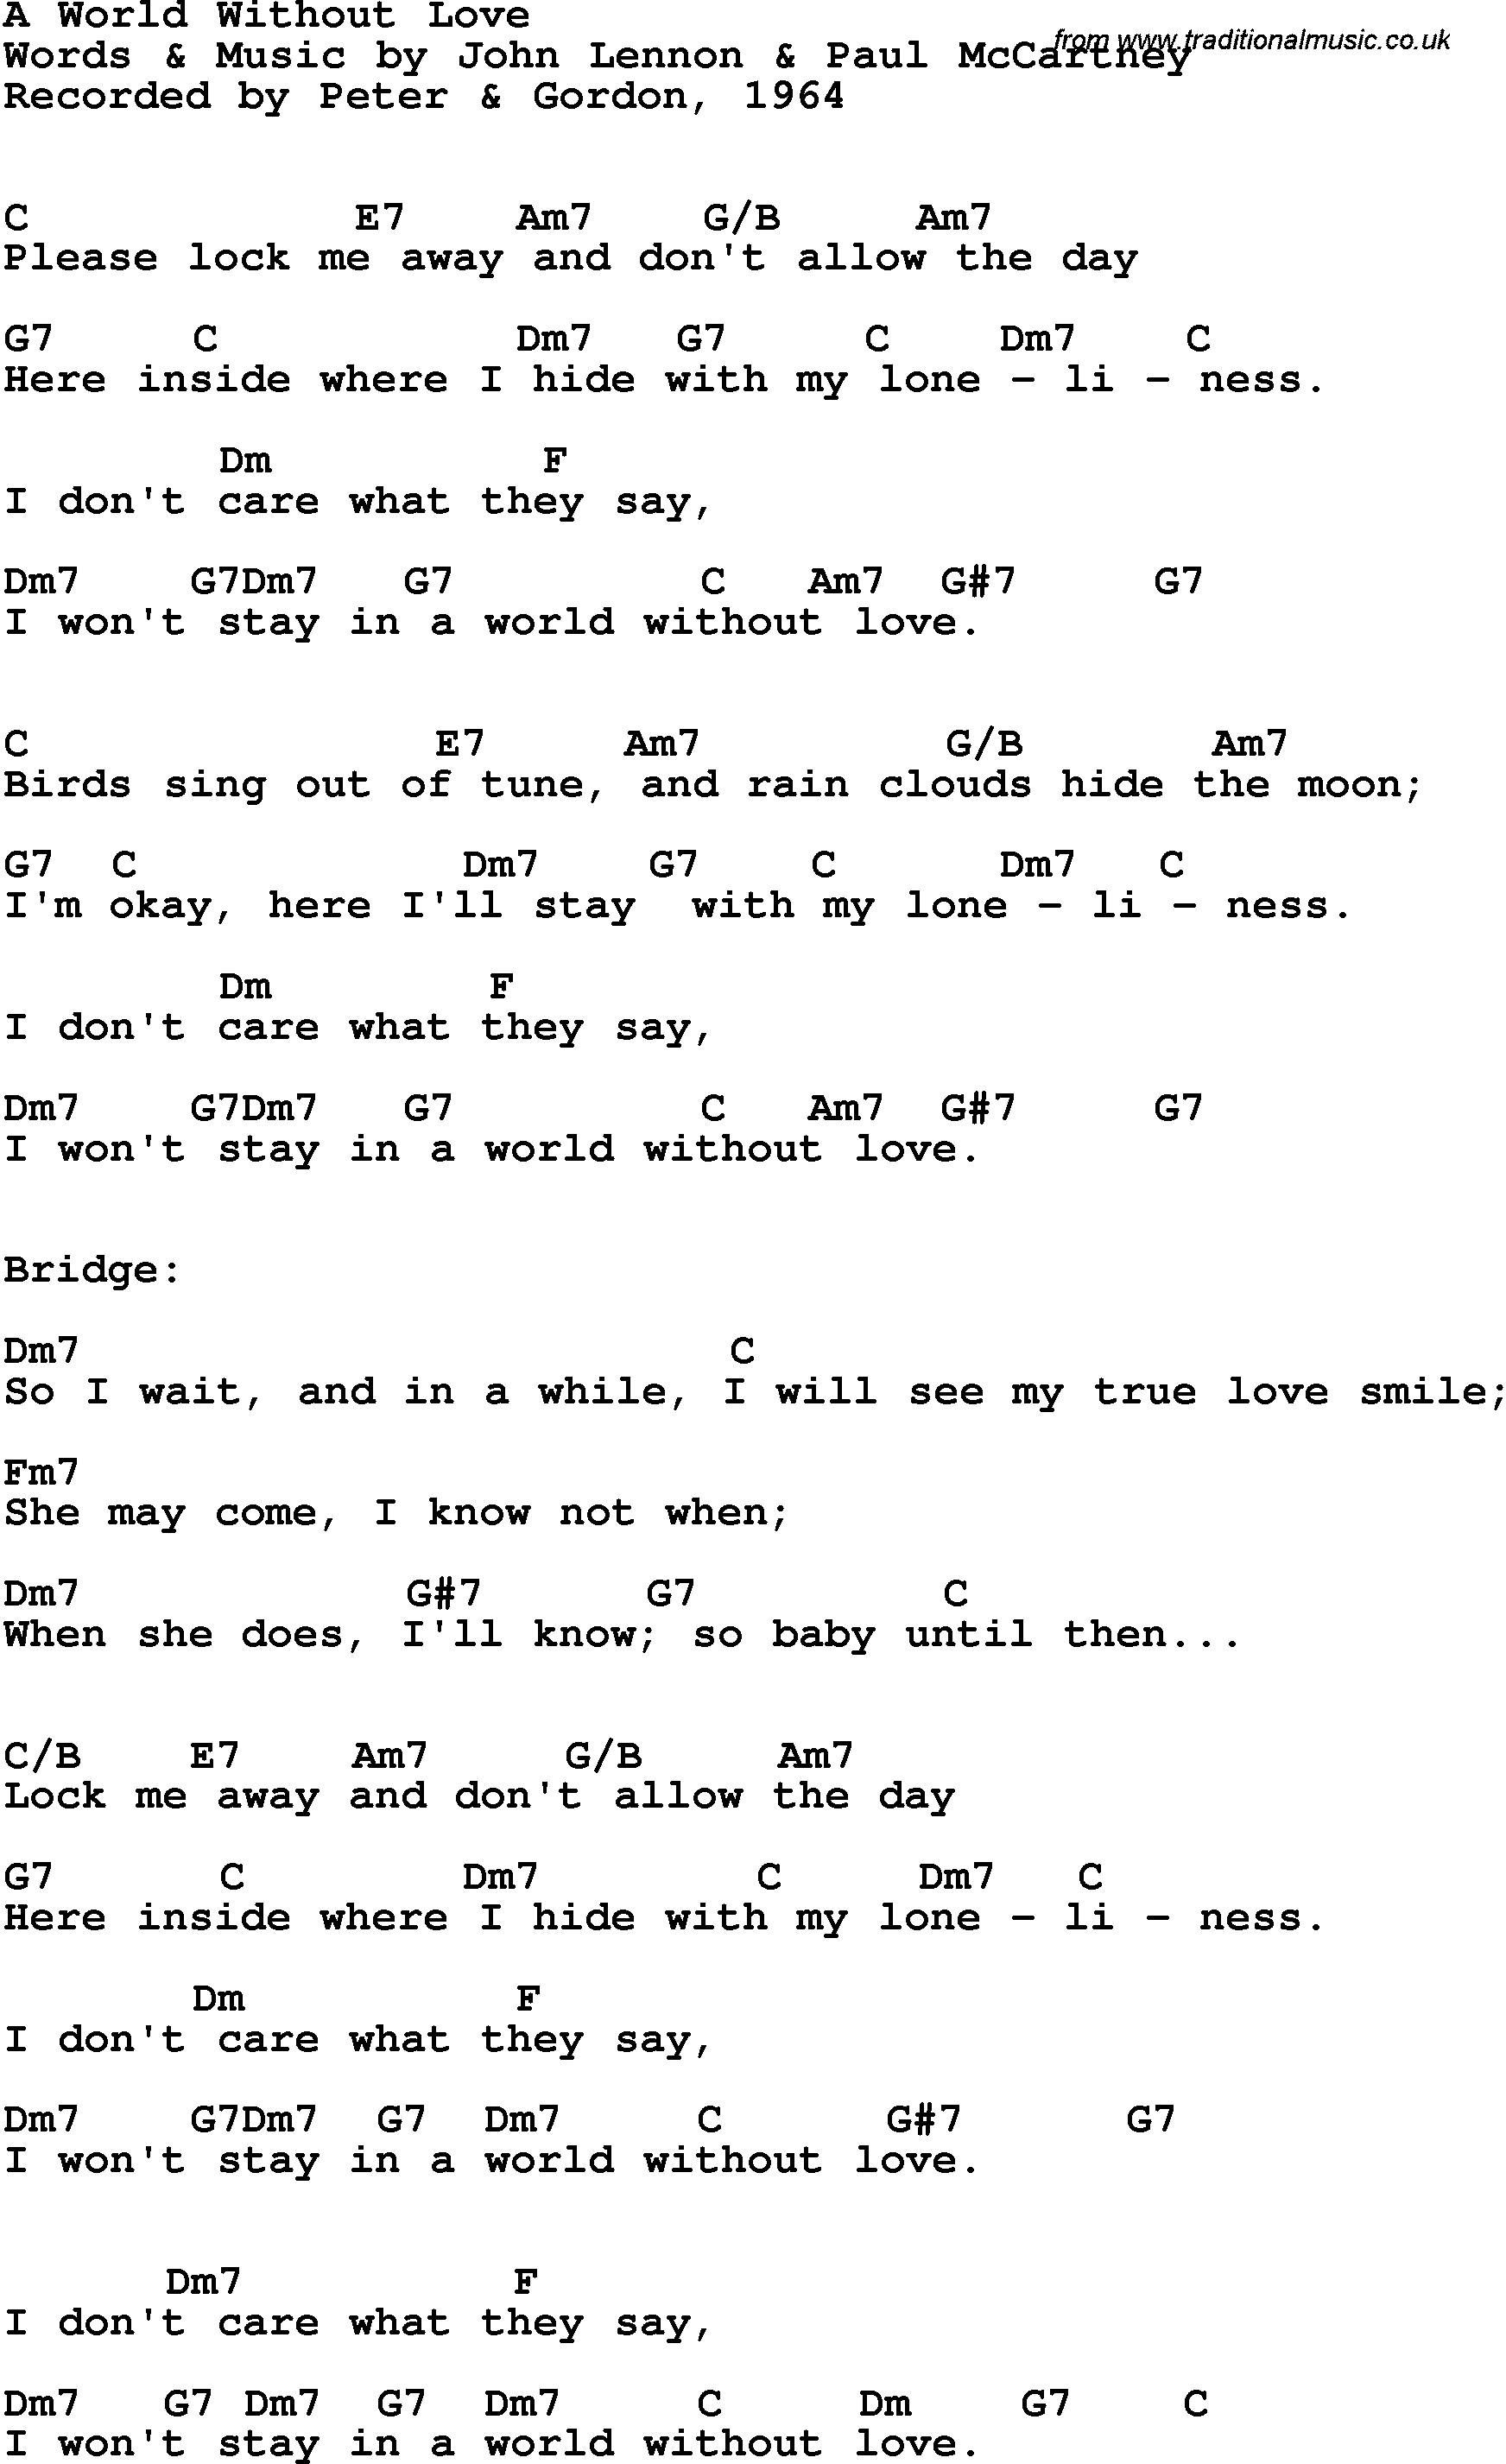 Song Lyrics with guitar chords for A World Without Love - Peter & Gordon, 1964